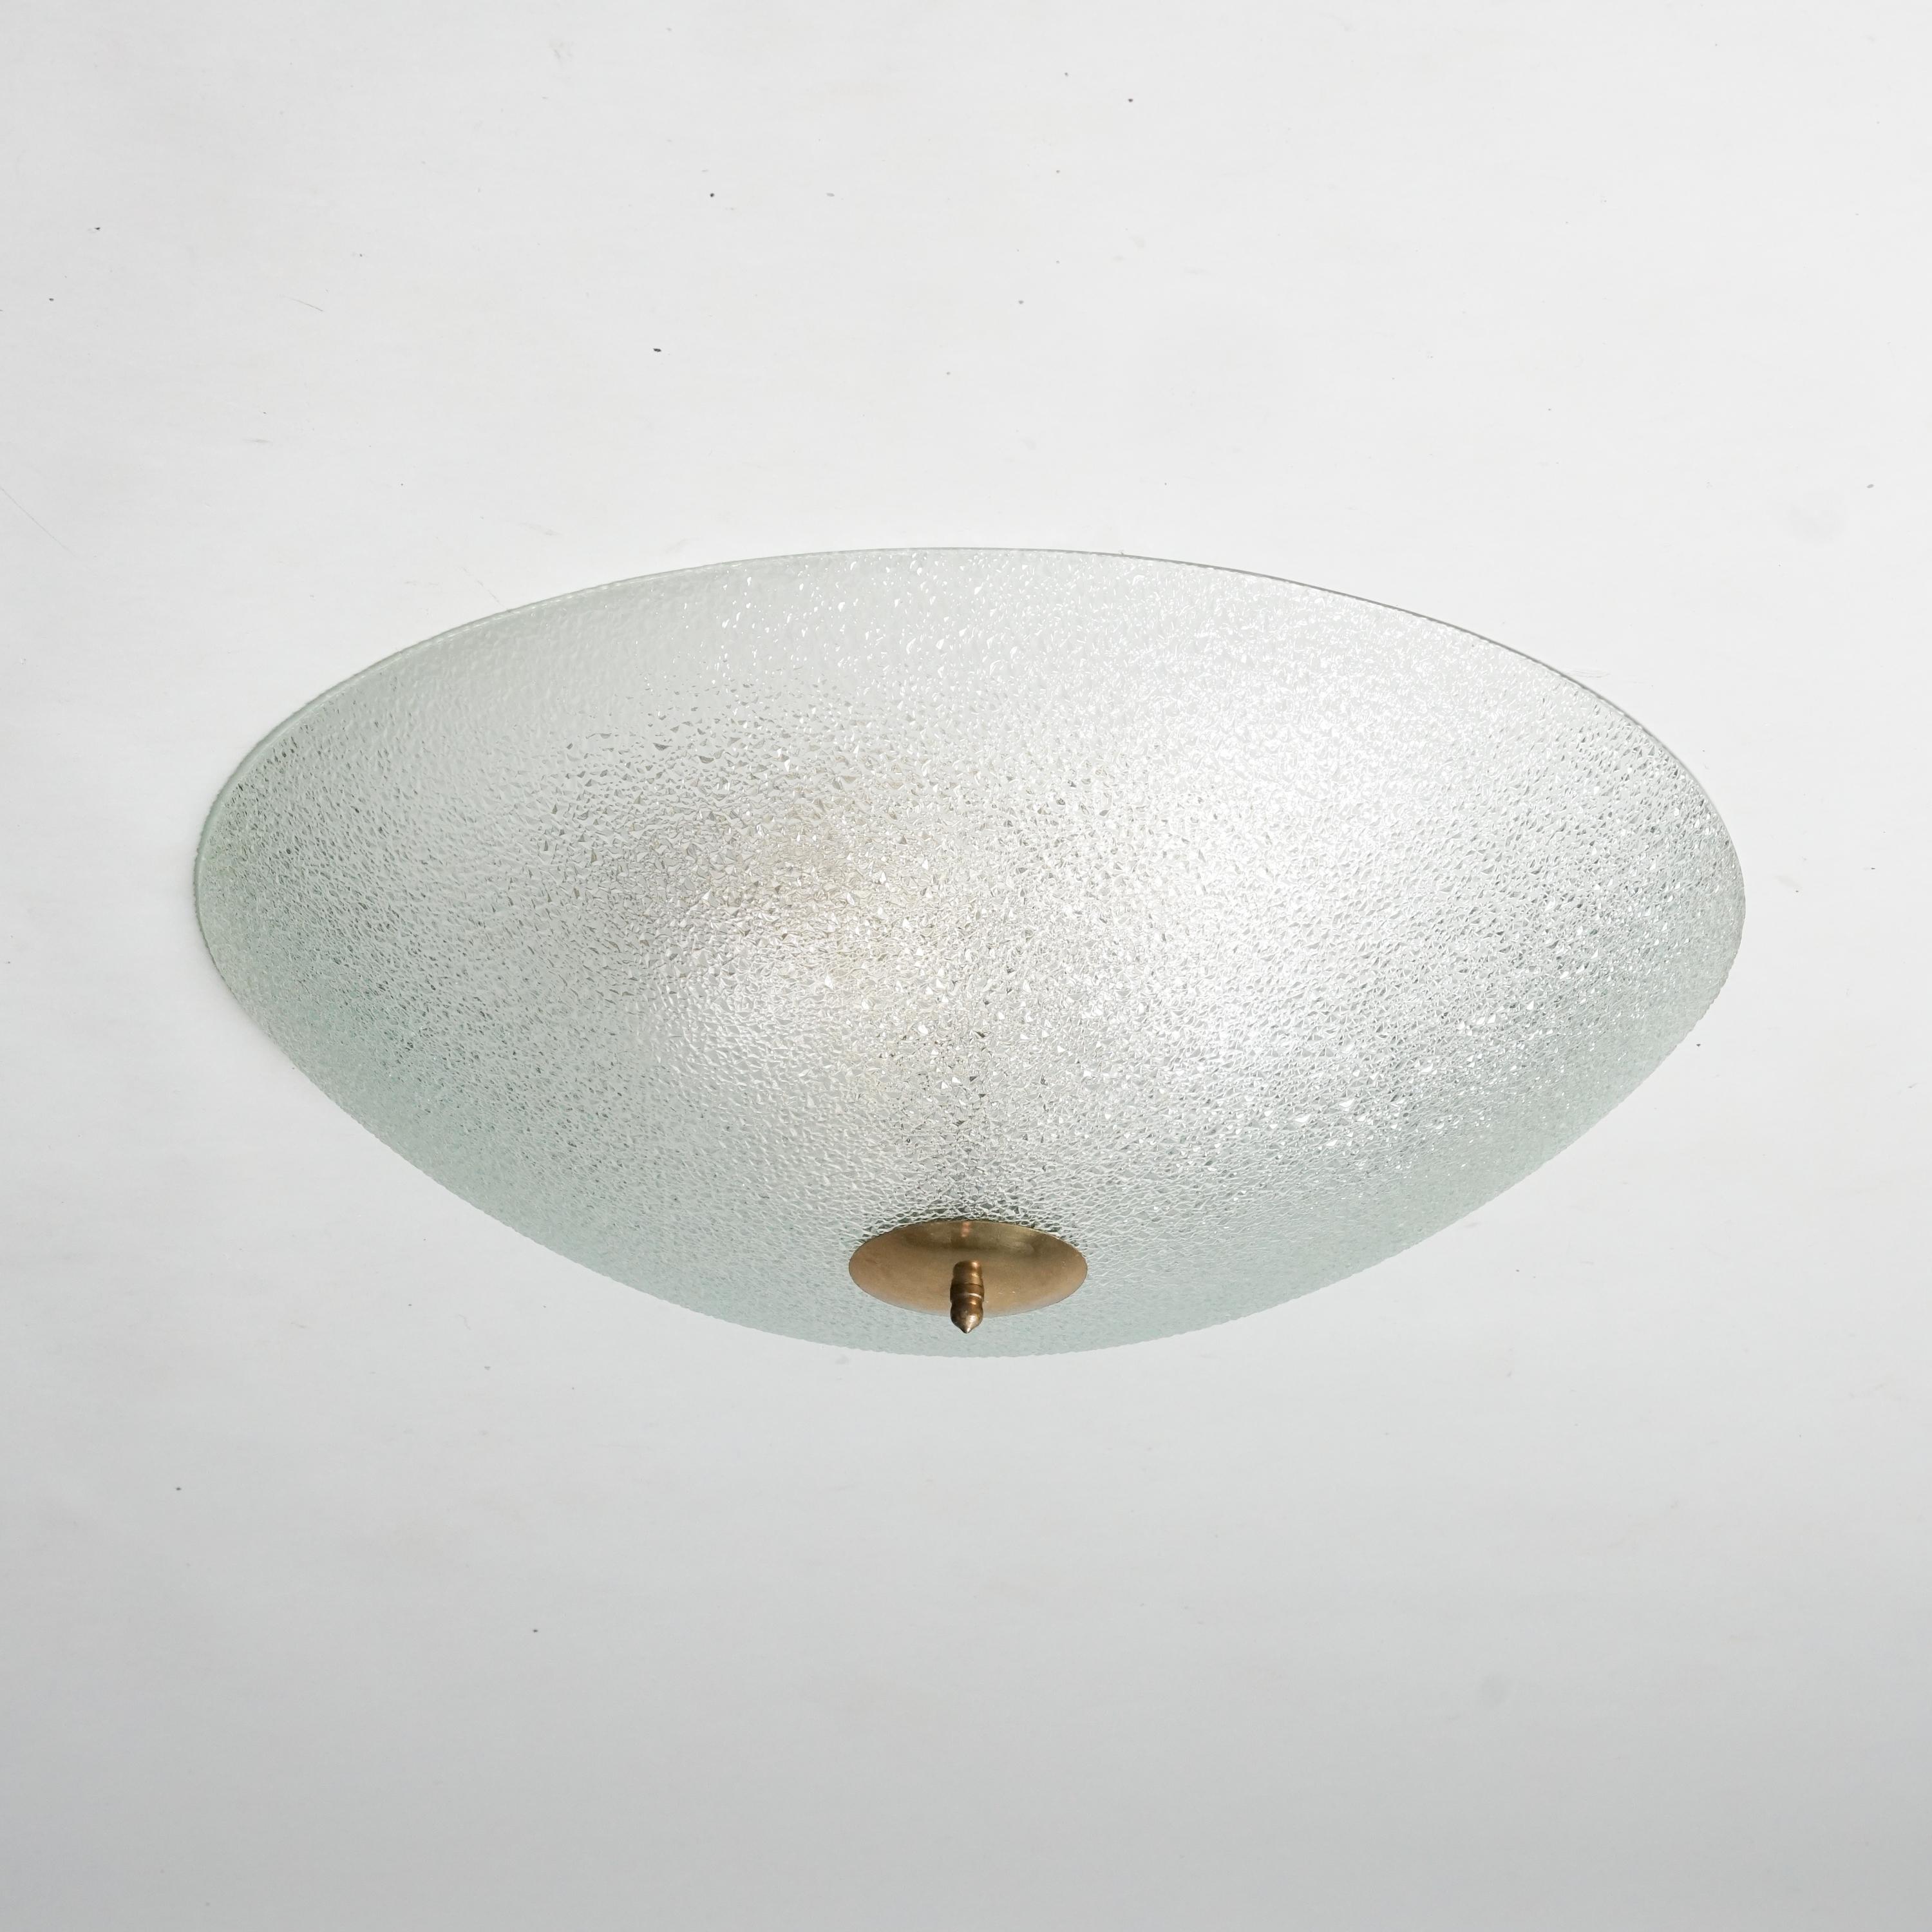 Flush mount, manufactured by Lasipaino Oy, 1960s. Frosted glass with brass details. Good vintage condition, minor patina consistent with age and use. Beautiful minimalistic design. 
